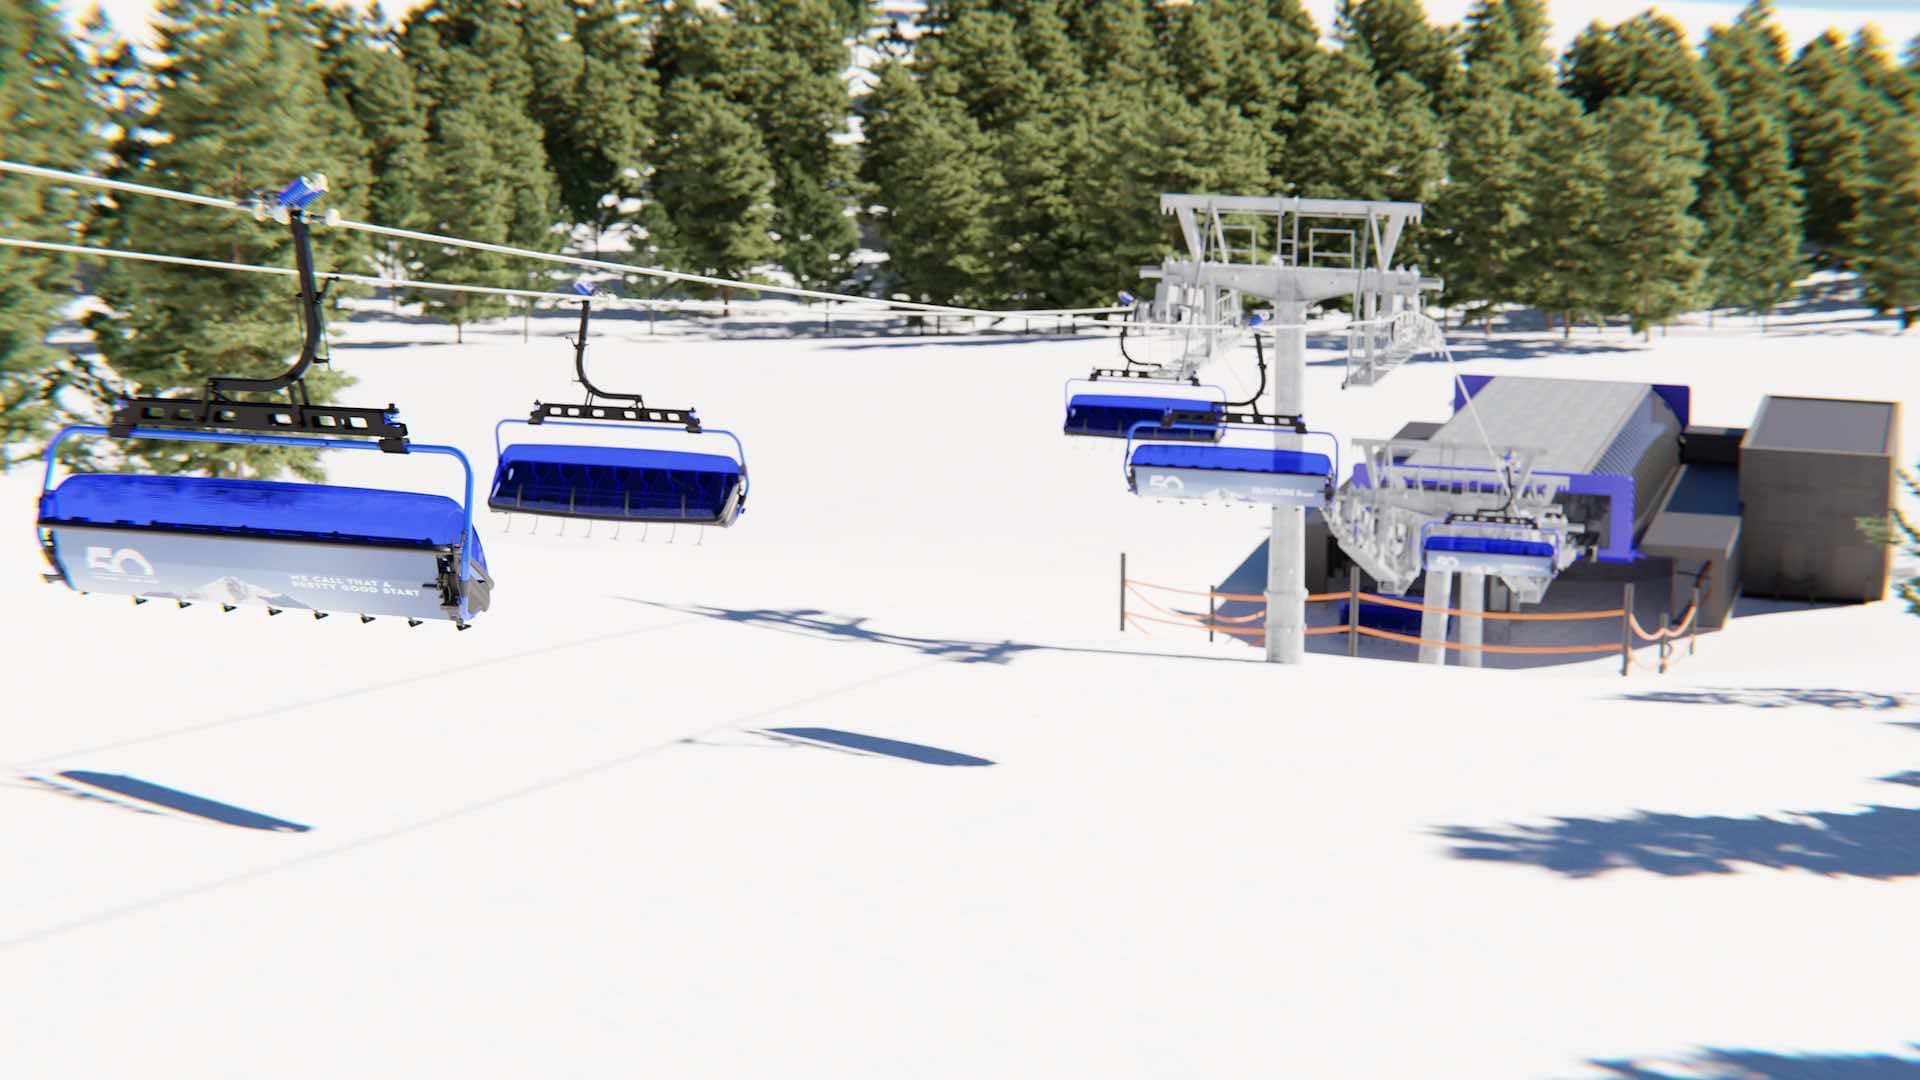 Chairlift rendering